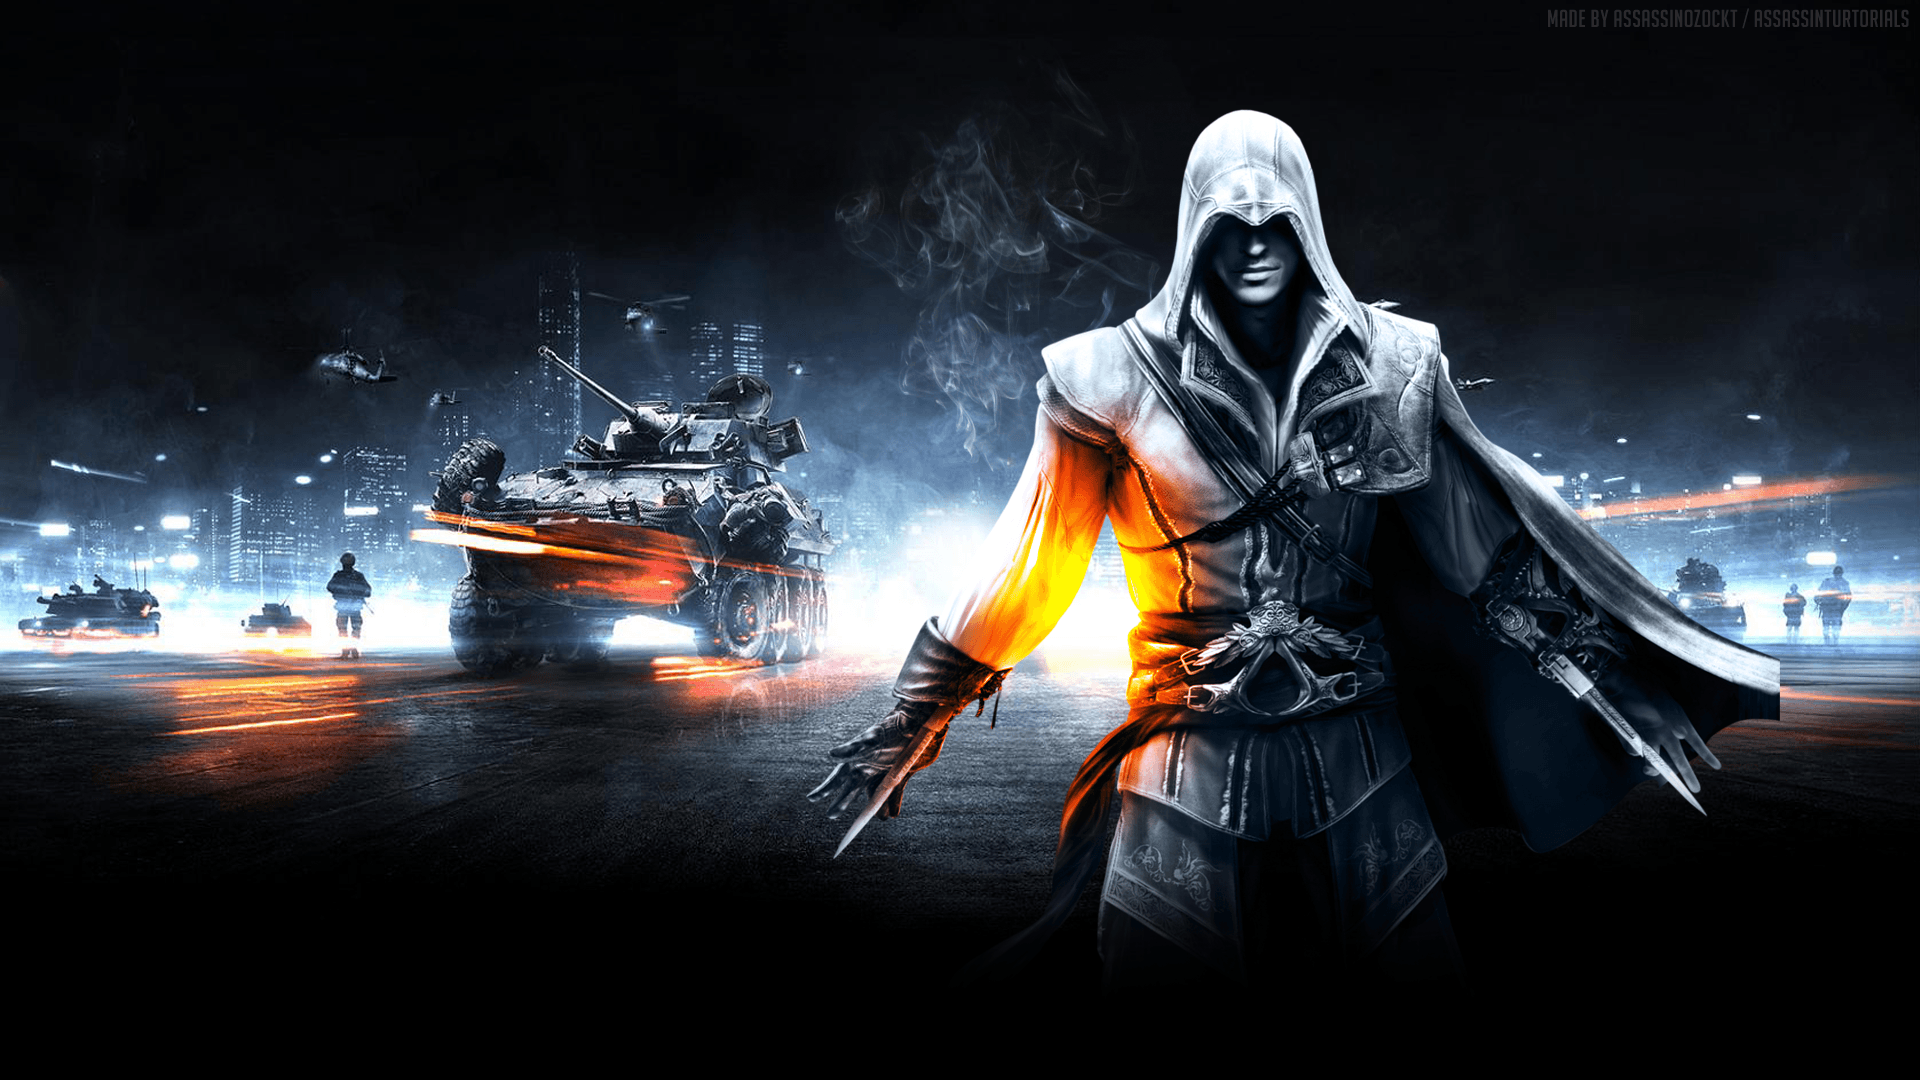 Download PC Games Wallpaper Image Widescreen HD Free